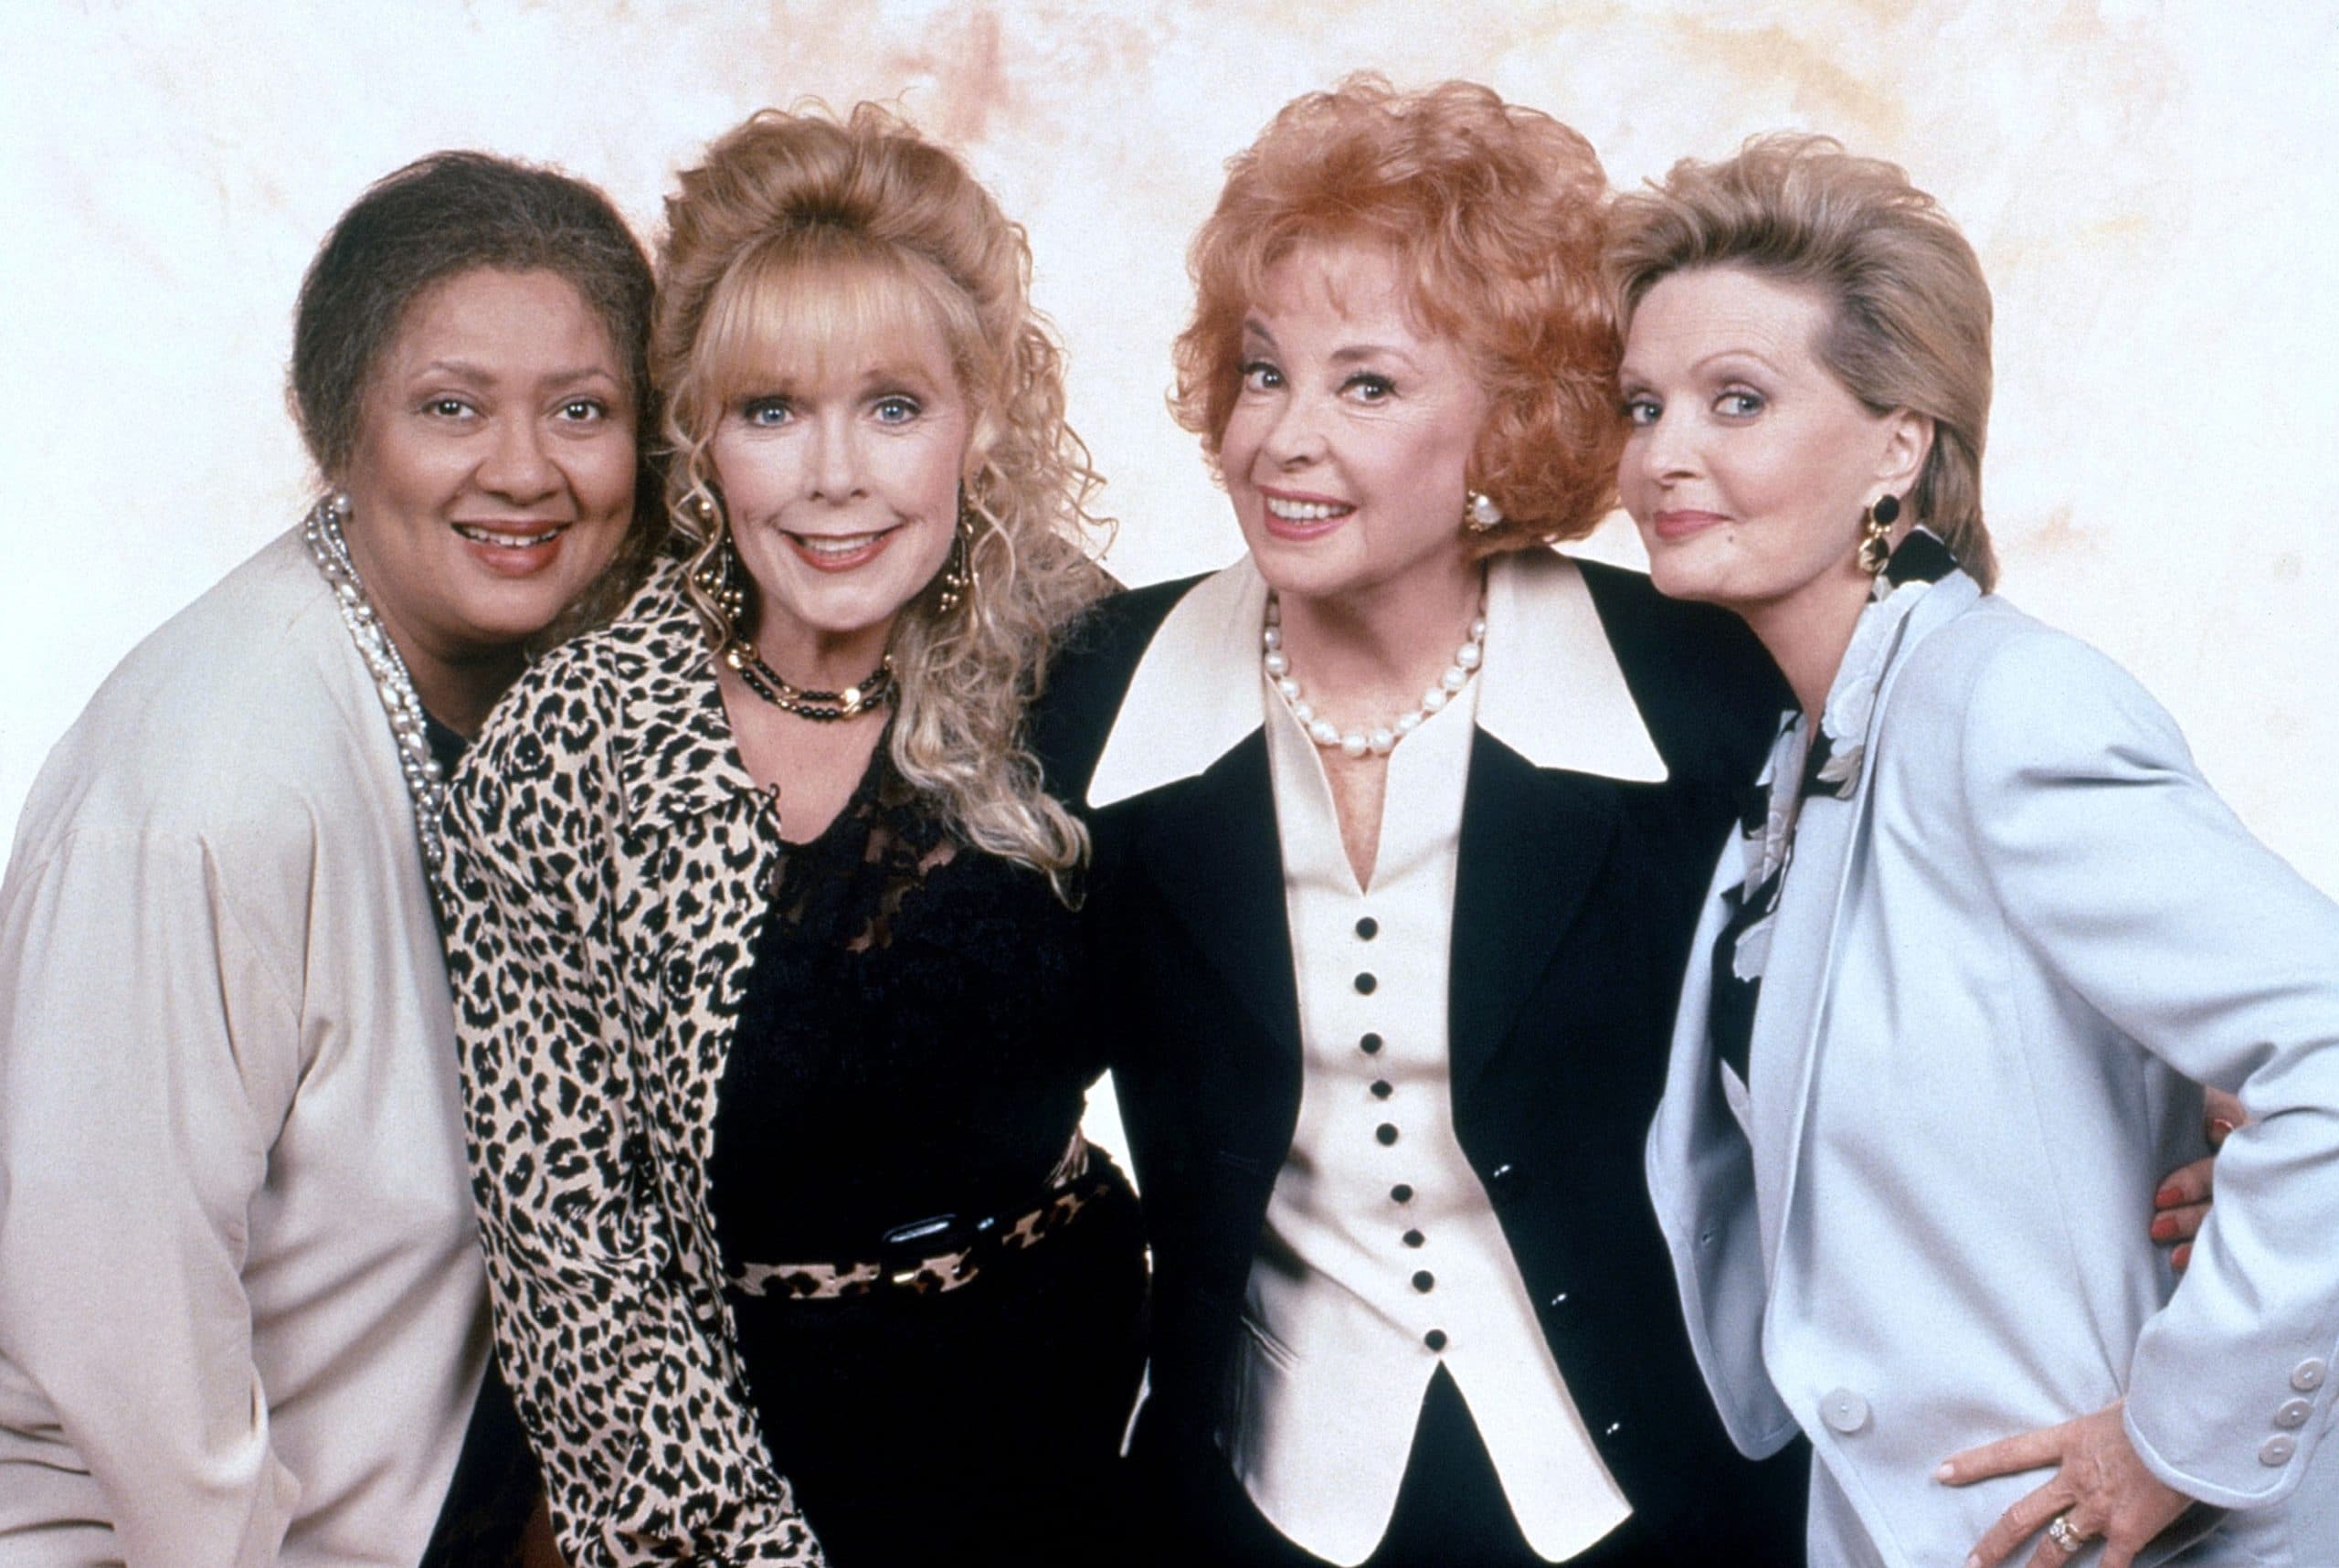 DAVE'S WORLD, from left: Barbara Montgomery, Stella Stevens, Audrey Meadows, Florence Henderson, 'The Mommies'